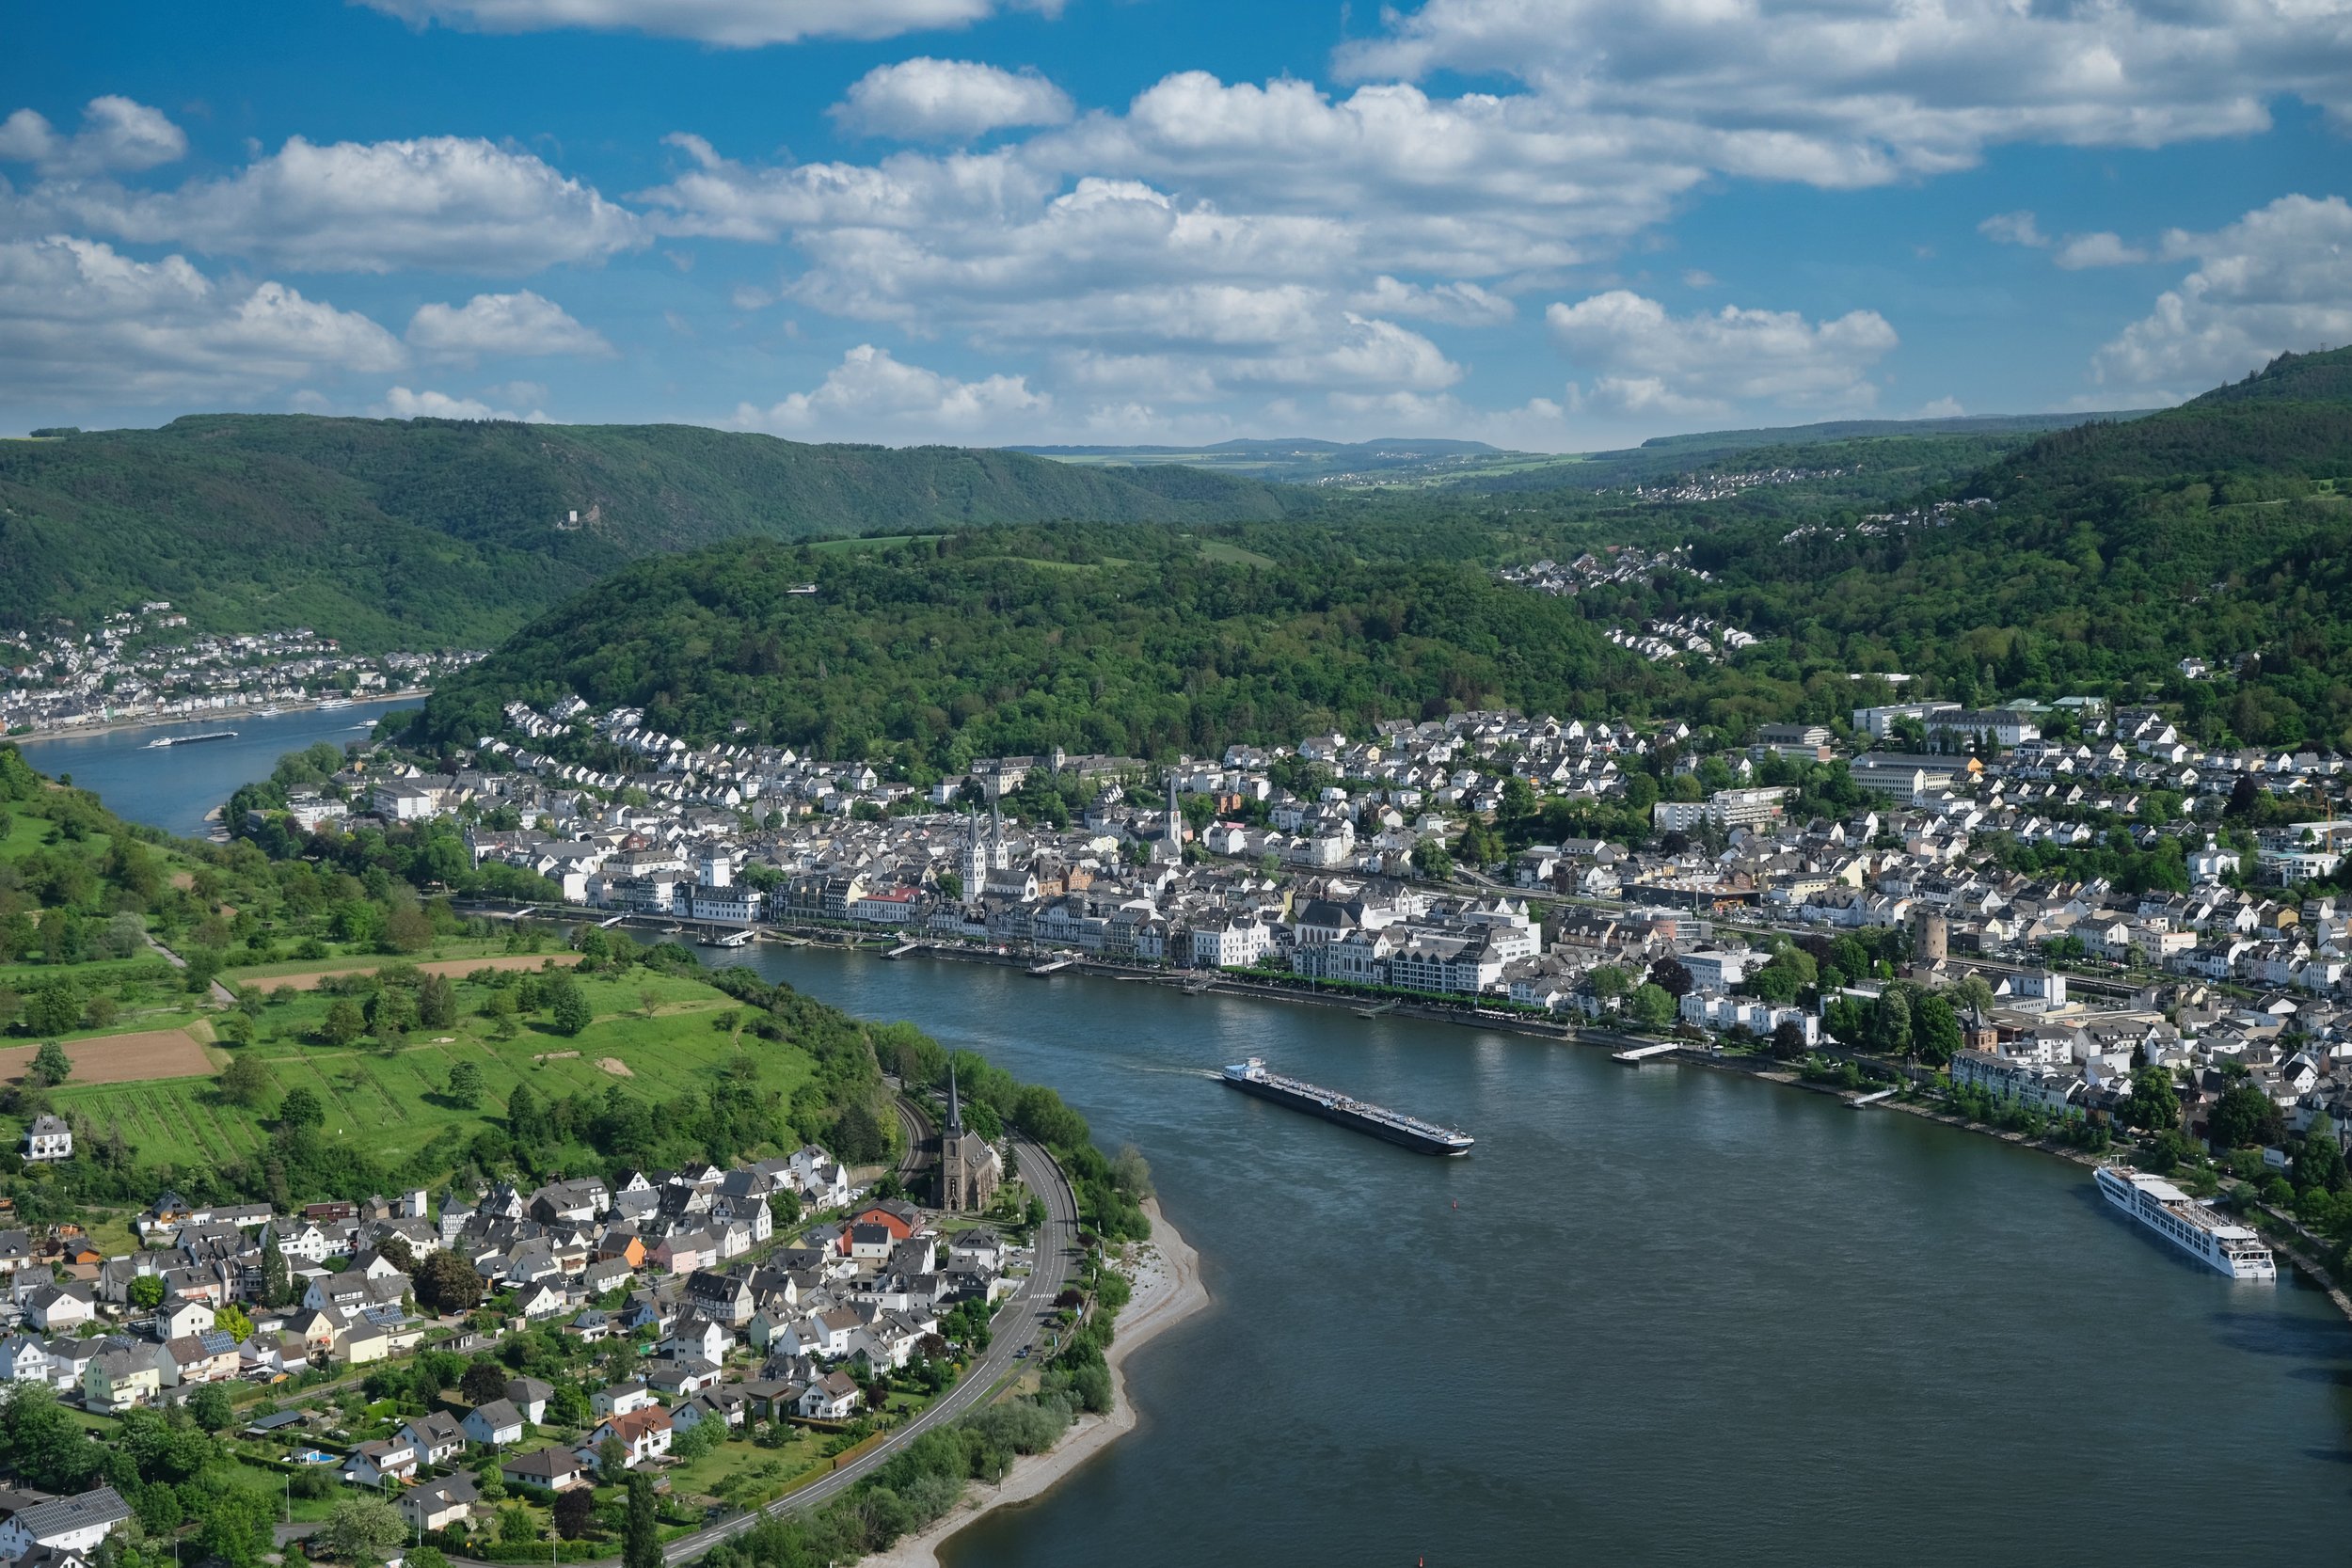 A View of Boppard